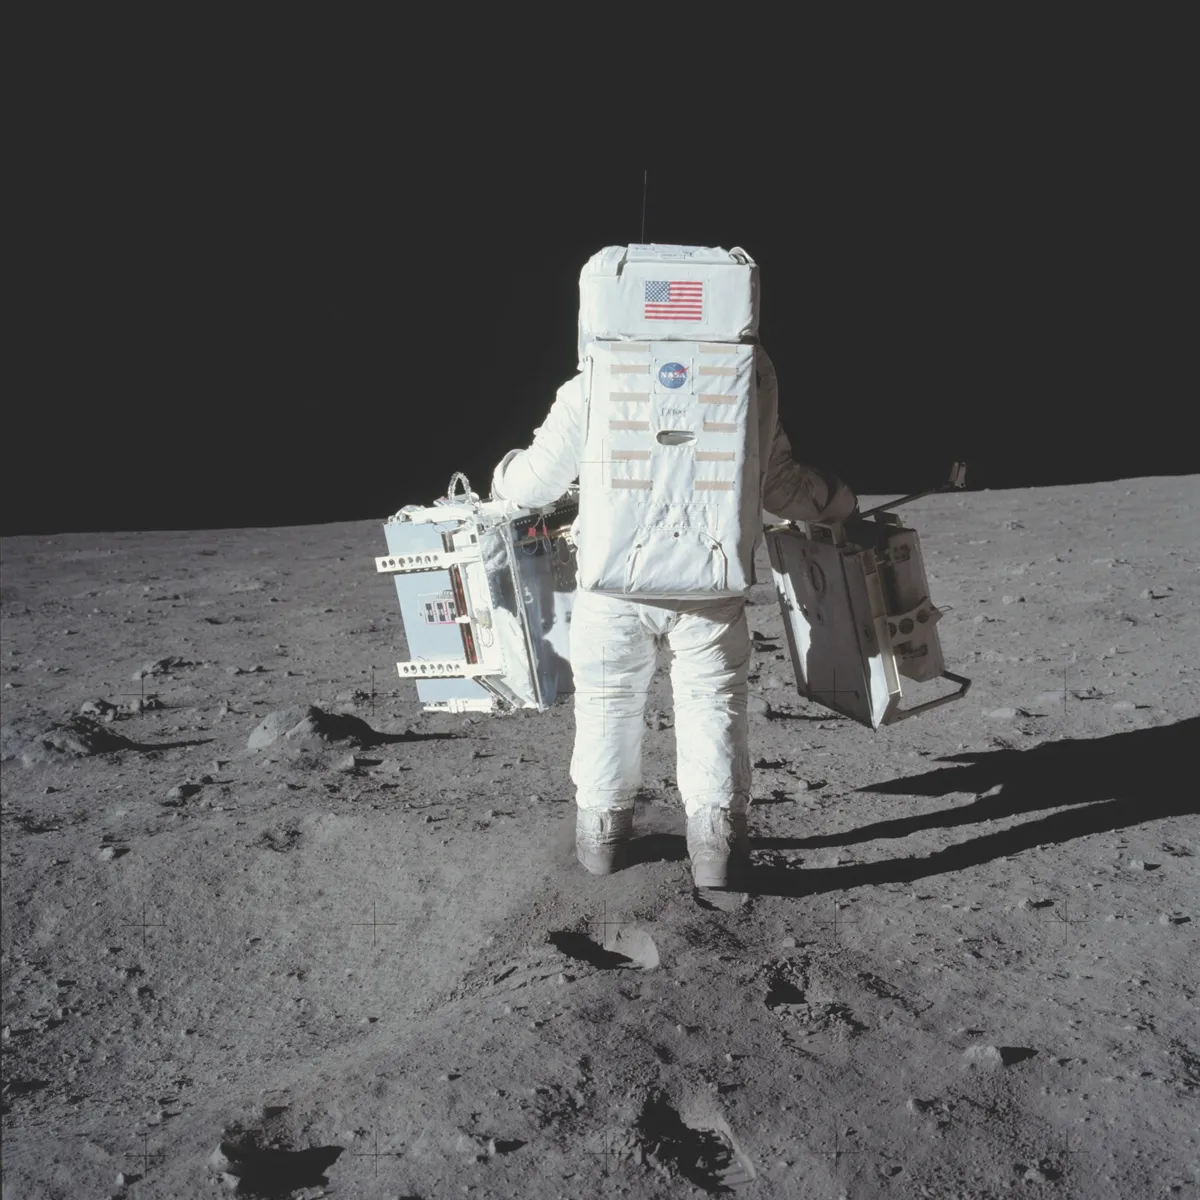 Reduced lunar gravity makes it easy for Aldrin to carry a pair of experiment packages for deployment © NASA/JPL